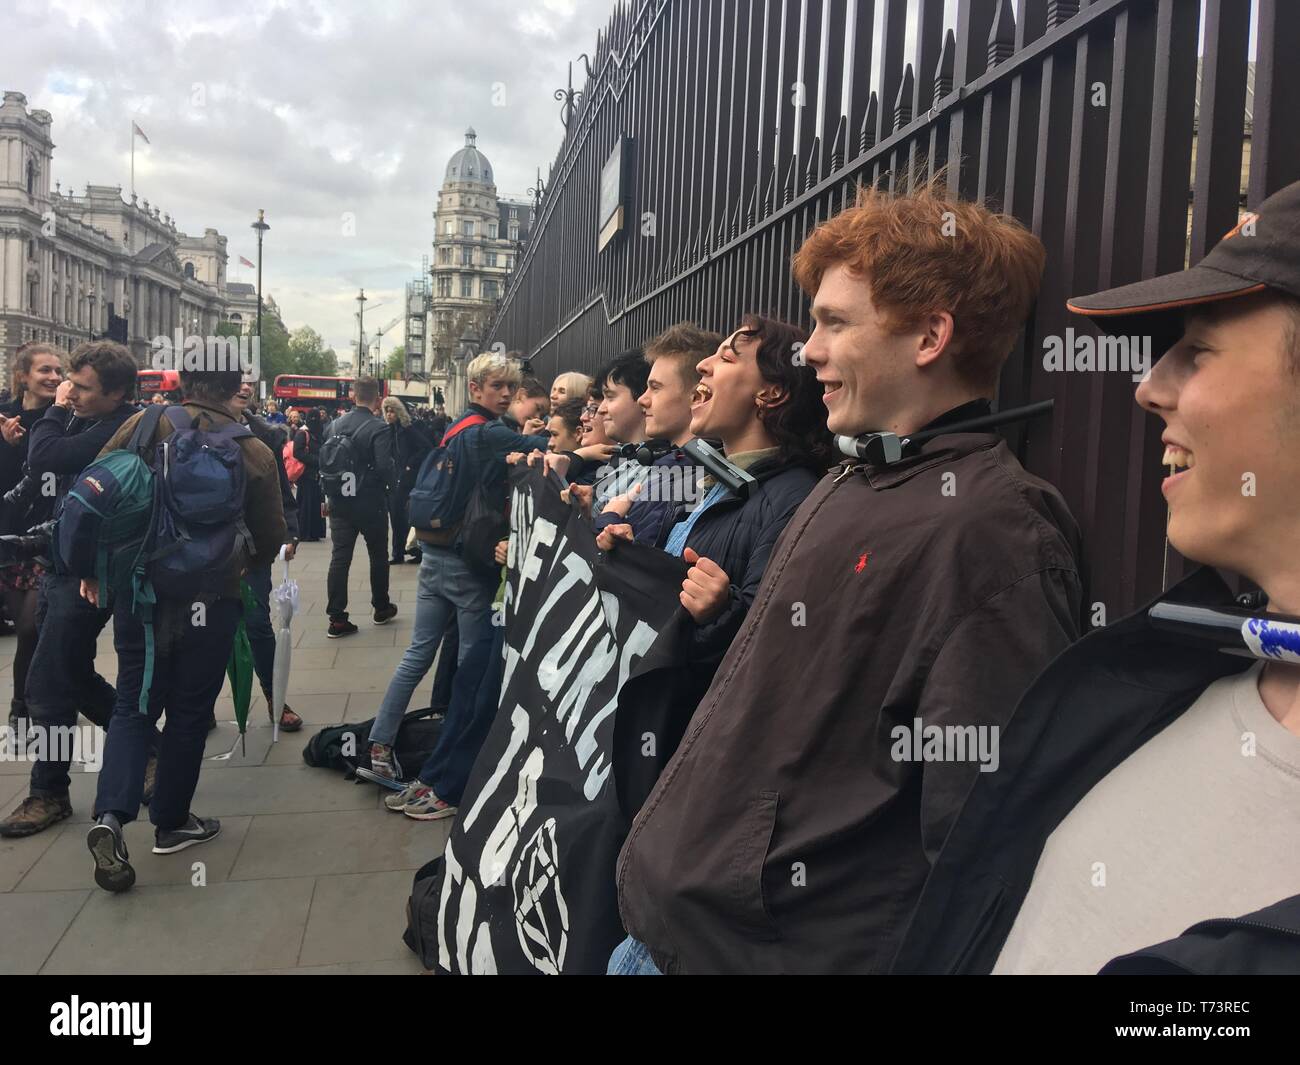 Protesters from the youth wing of Extinction Rebellion tie themselves to a fence outside Parliament in London to raise awareness of climate change ahead of the EU elections. Stock Photo